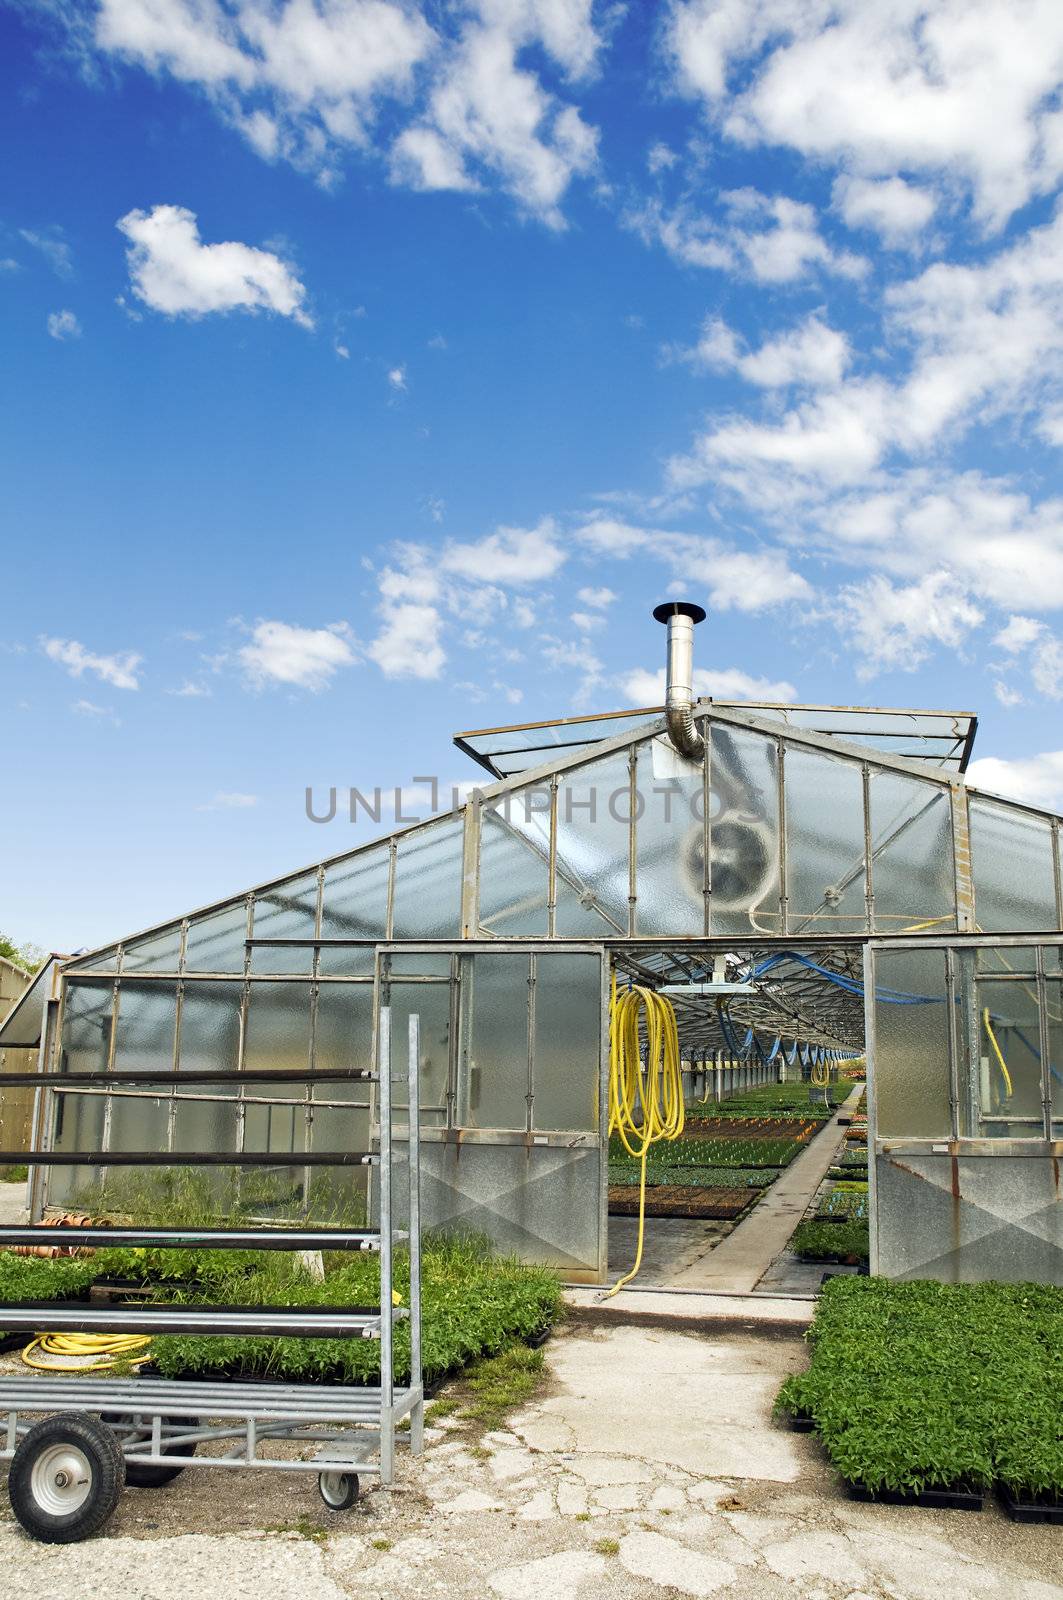 External view of a glasshouse against a sky with clouds